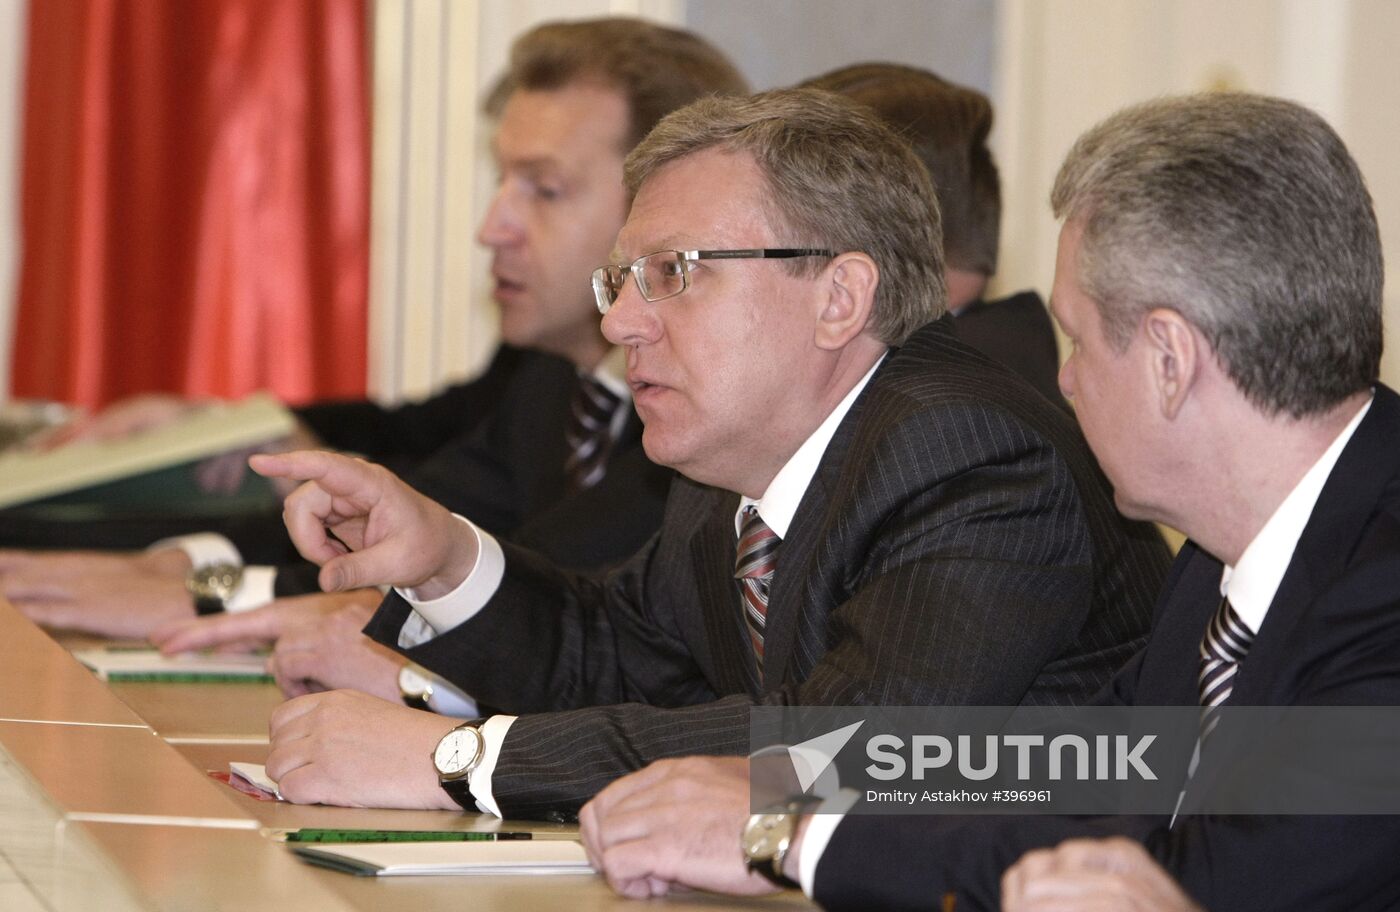 Russian Deputy Prime Minister and Finance Minister Alexei Kudrin